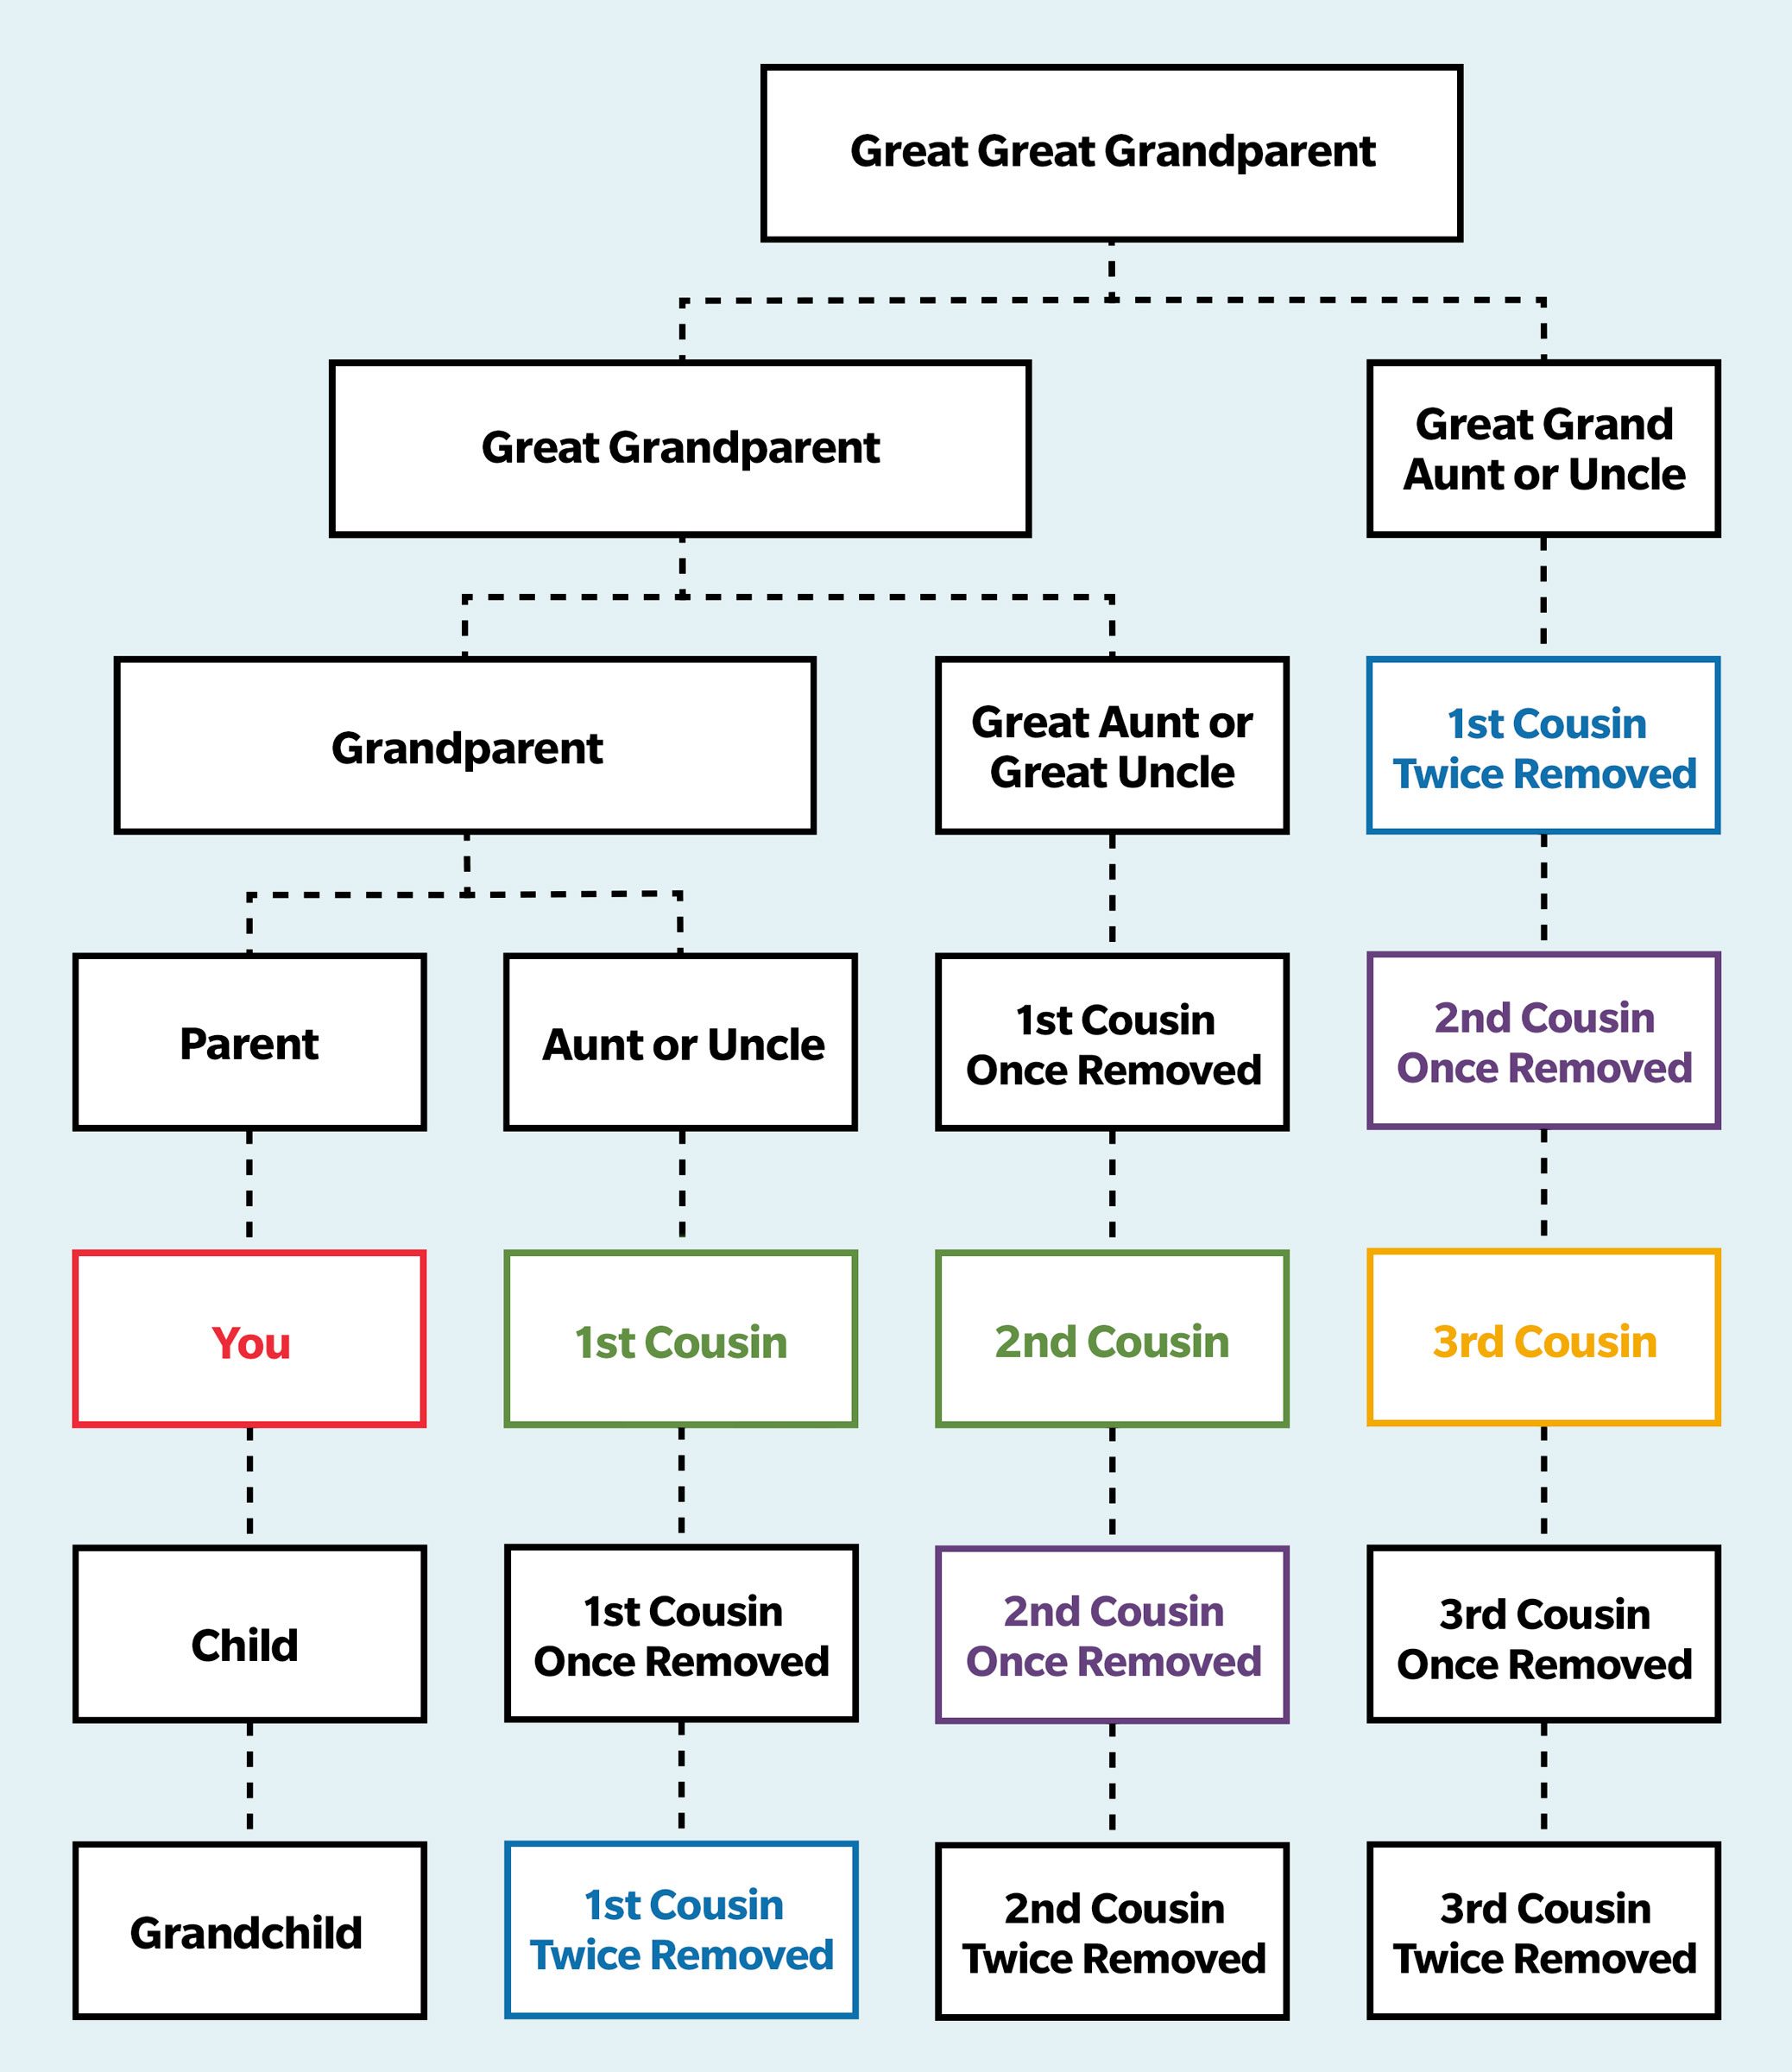 Family Tree Chart Showing Cousins Once and Twice Removed